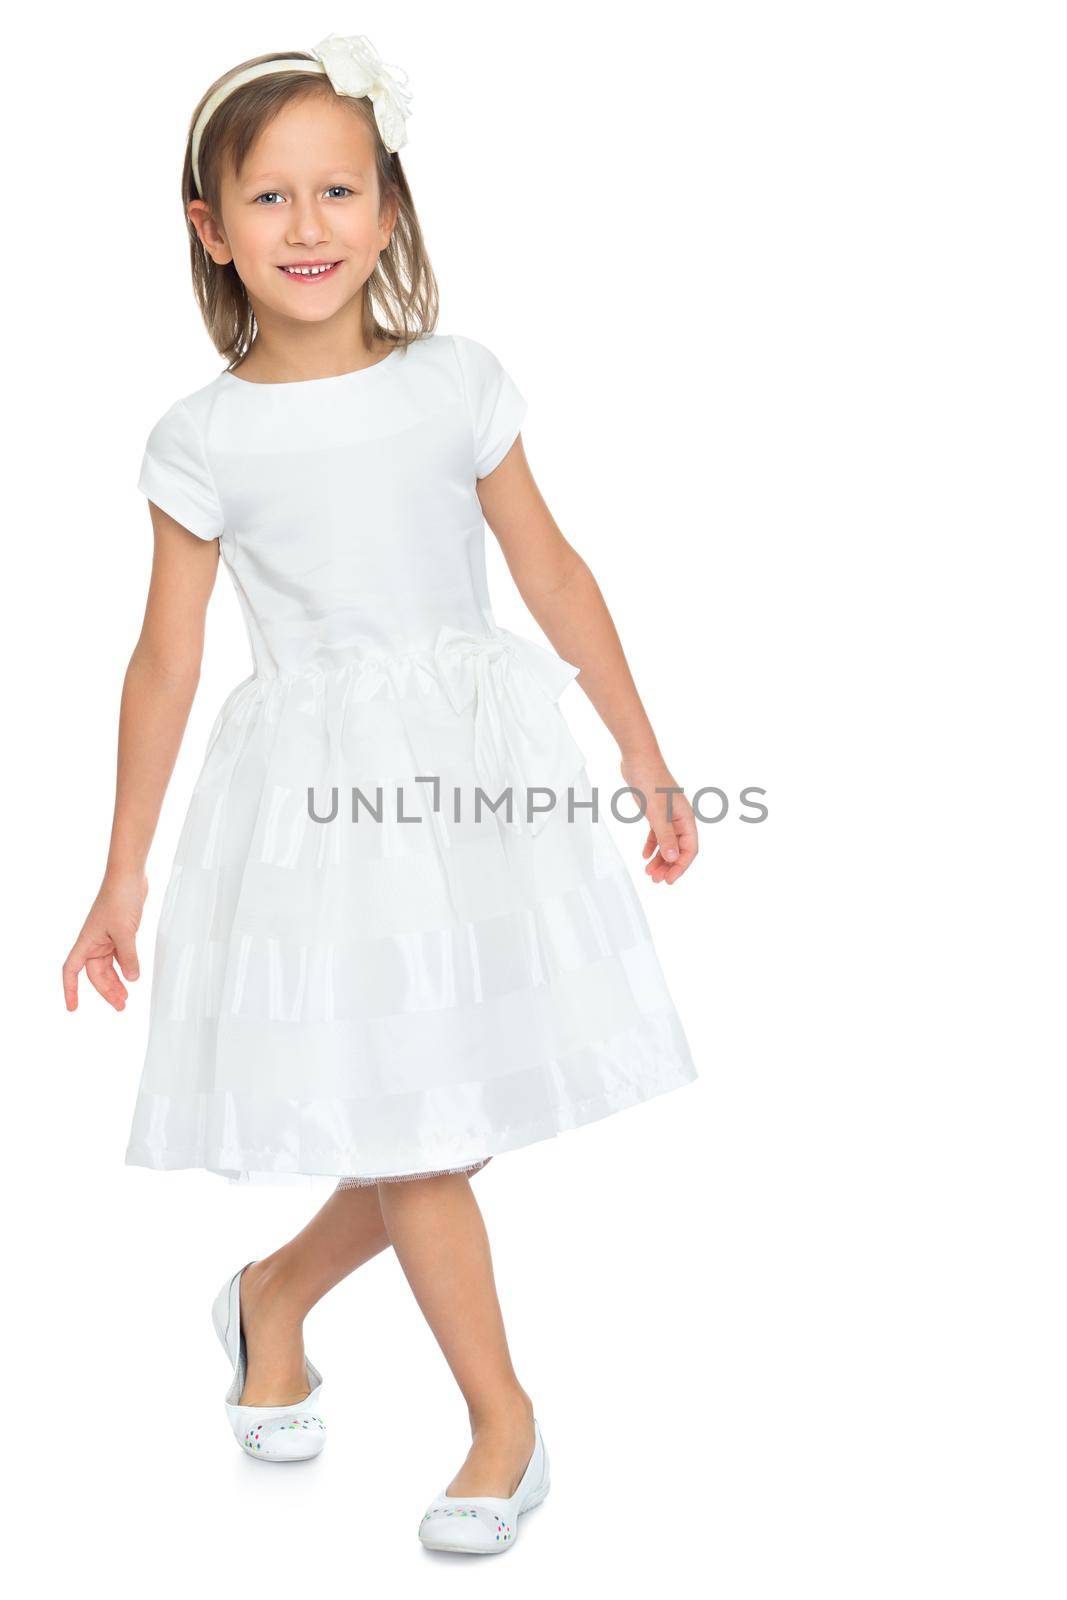 Cute little girl in fancy white dress - Isolated on white background